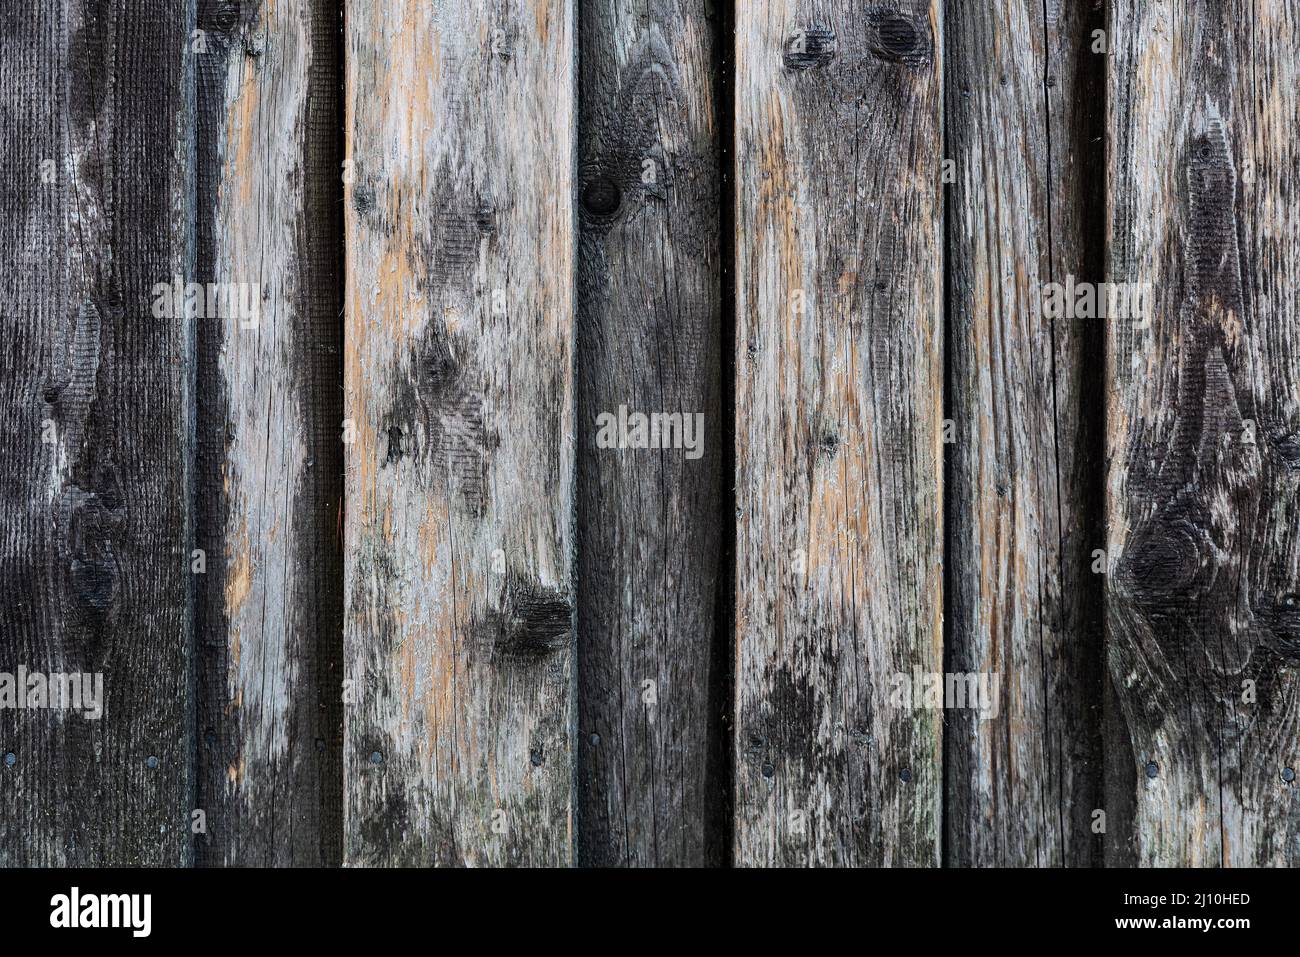 rough weathered wooden boards or planks background Stock Photo